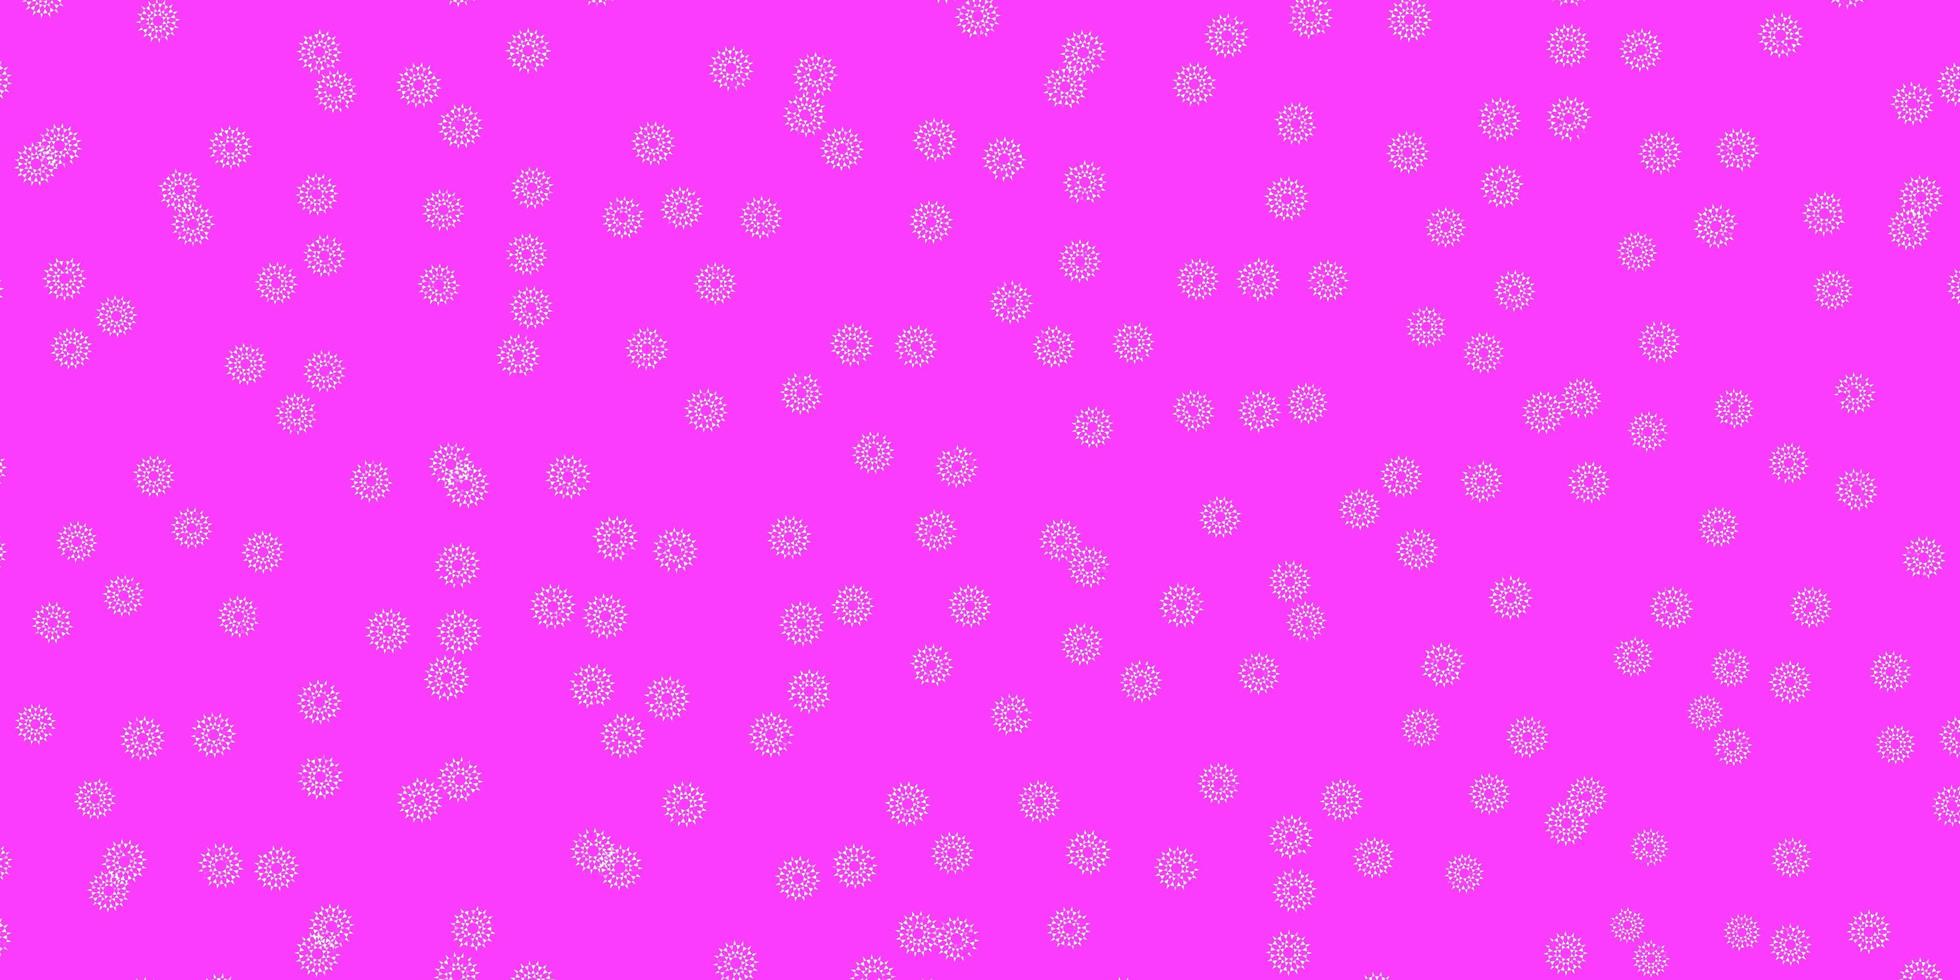 Light purple vector doodle pattern with flowers